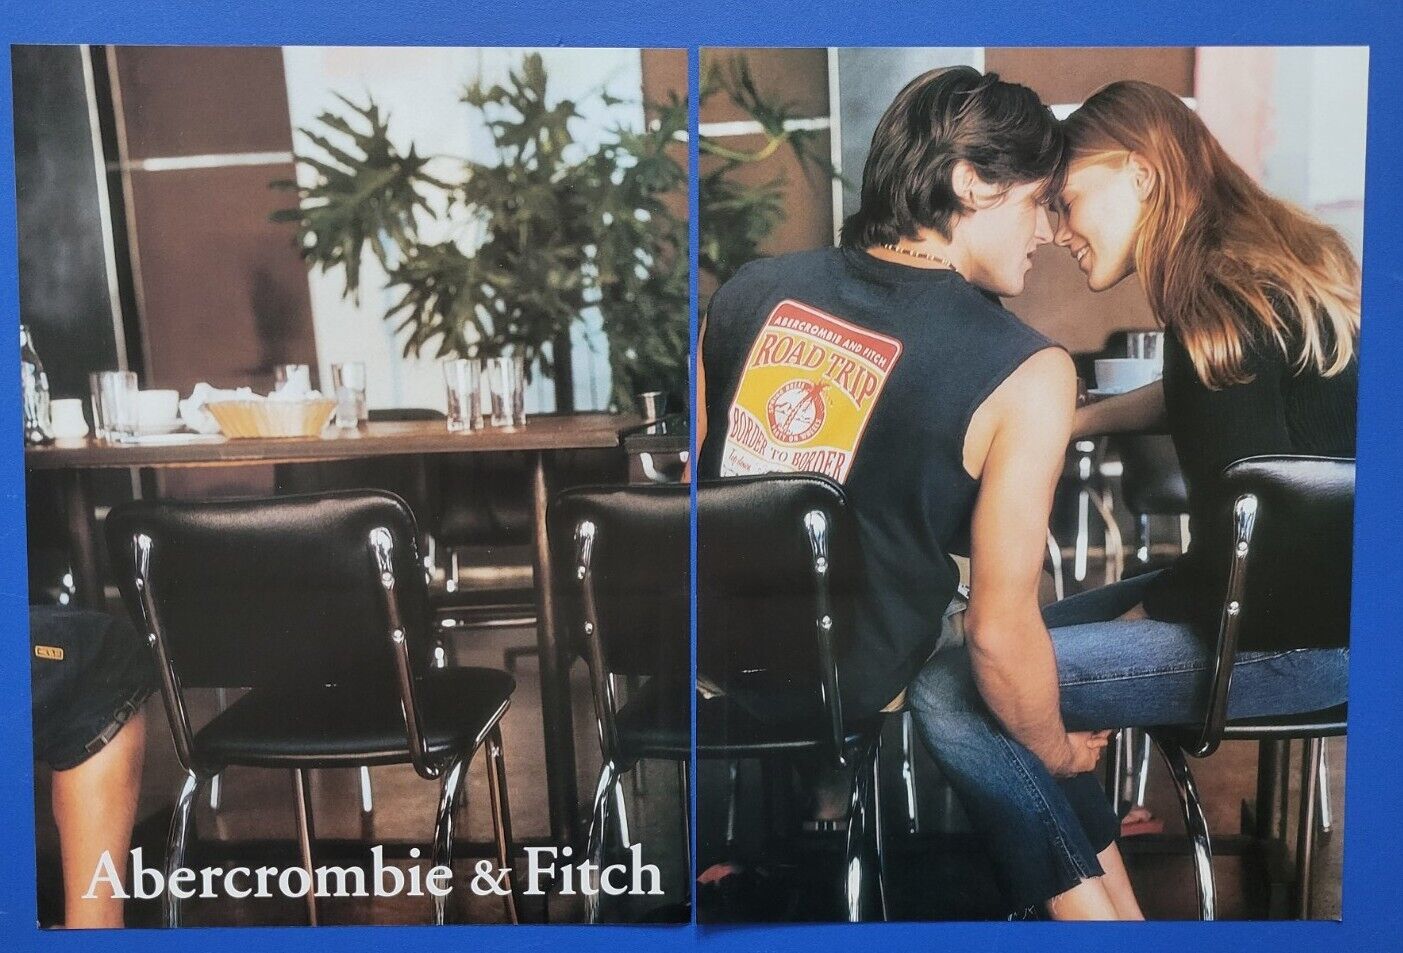 2002 PRINT AD 2 PAGE AD - ABERCROMBIE & FITCH CLOTHING AD ROAD TRIP COFFEE BAR